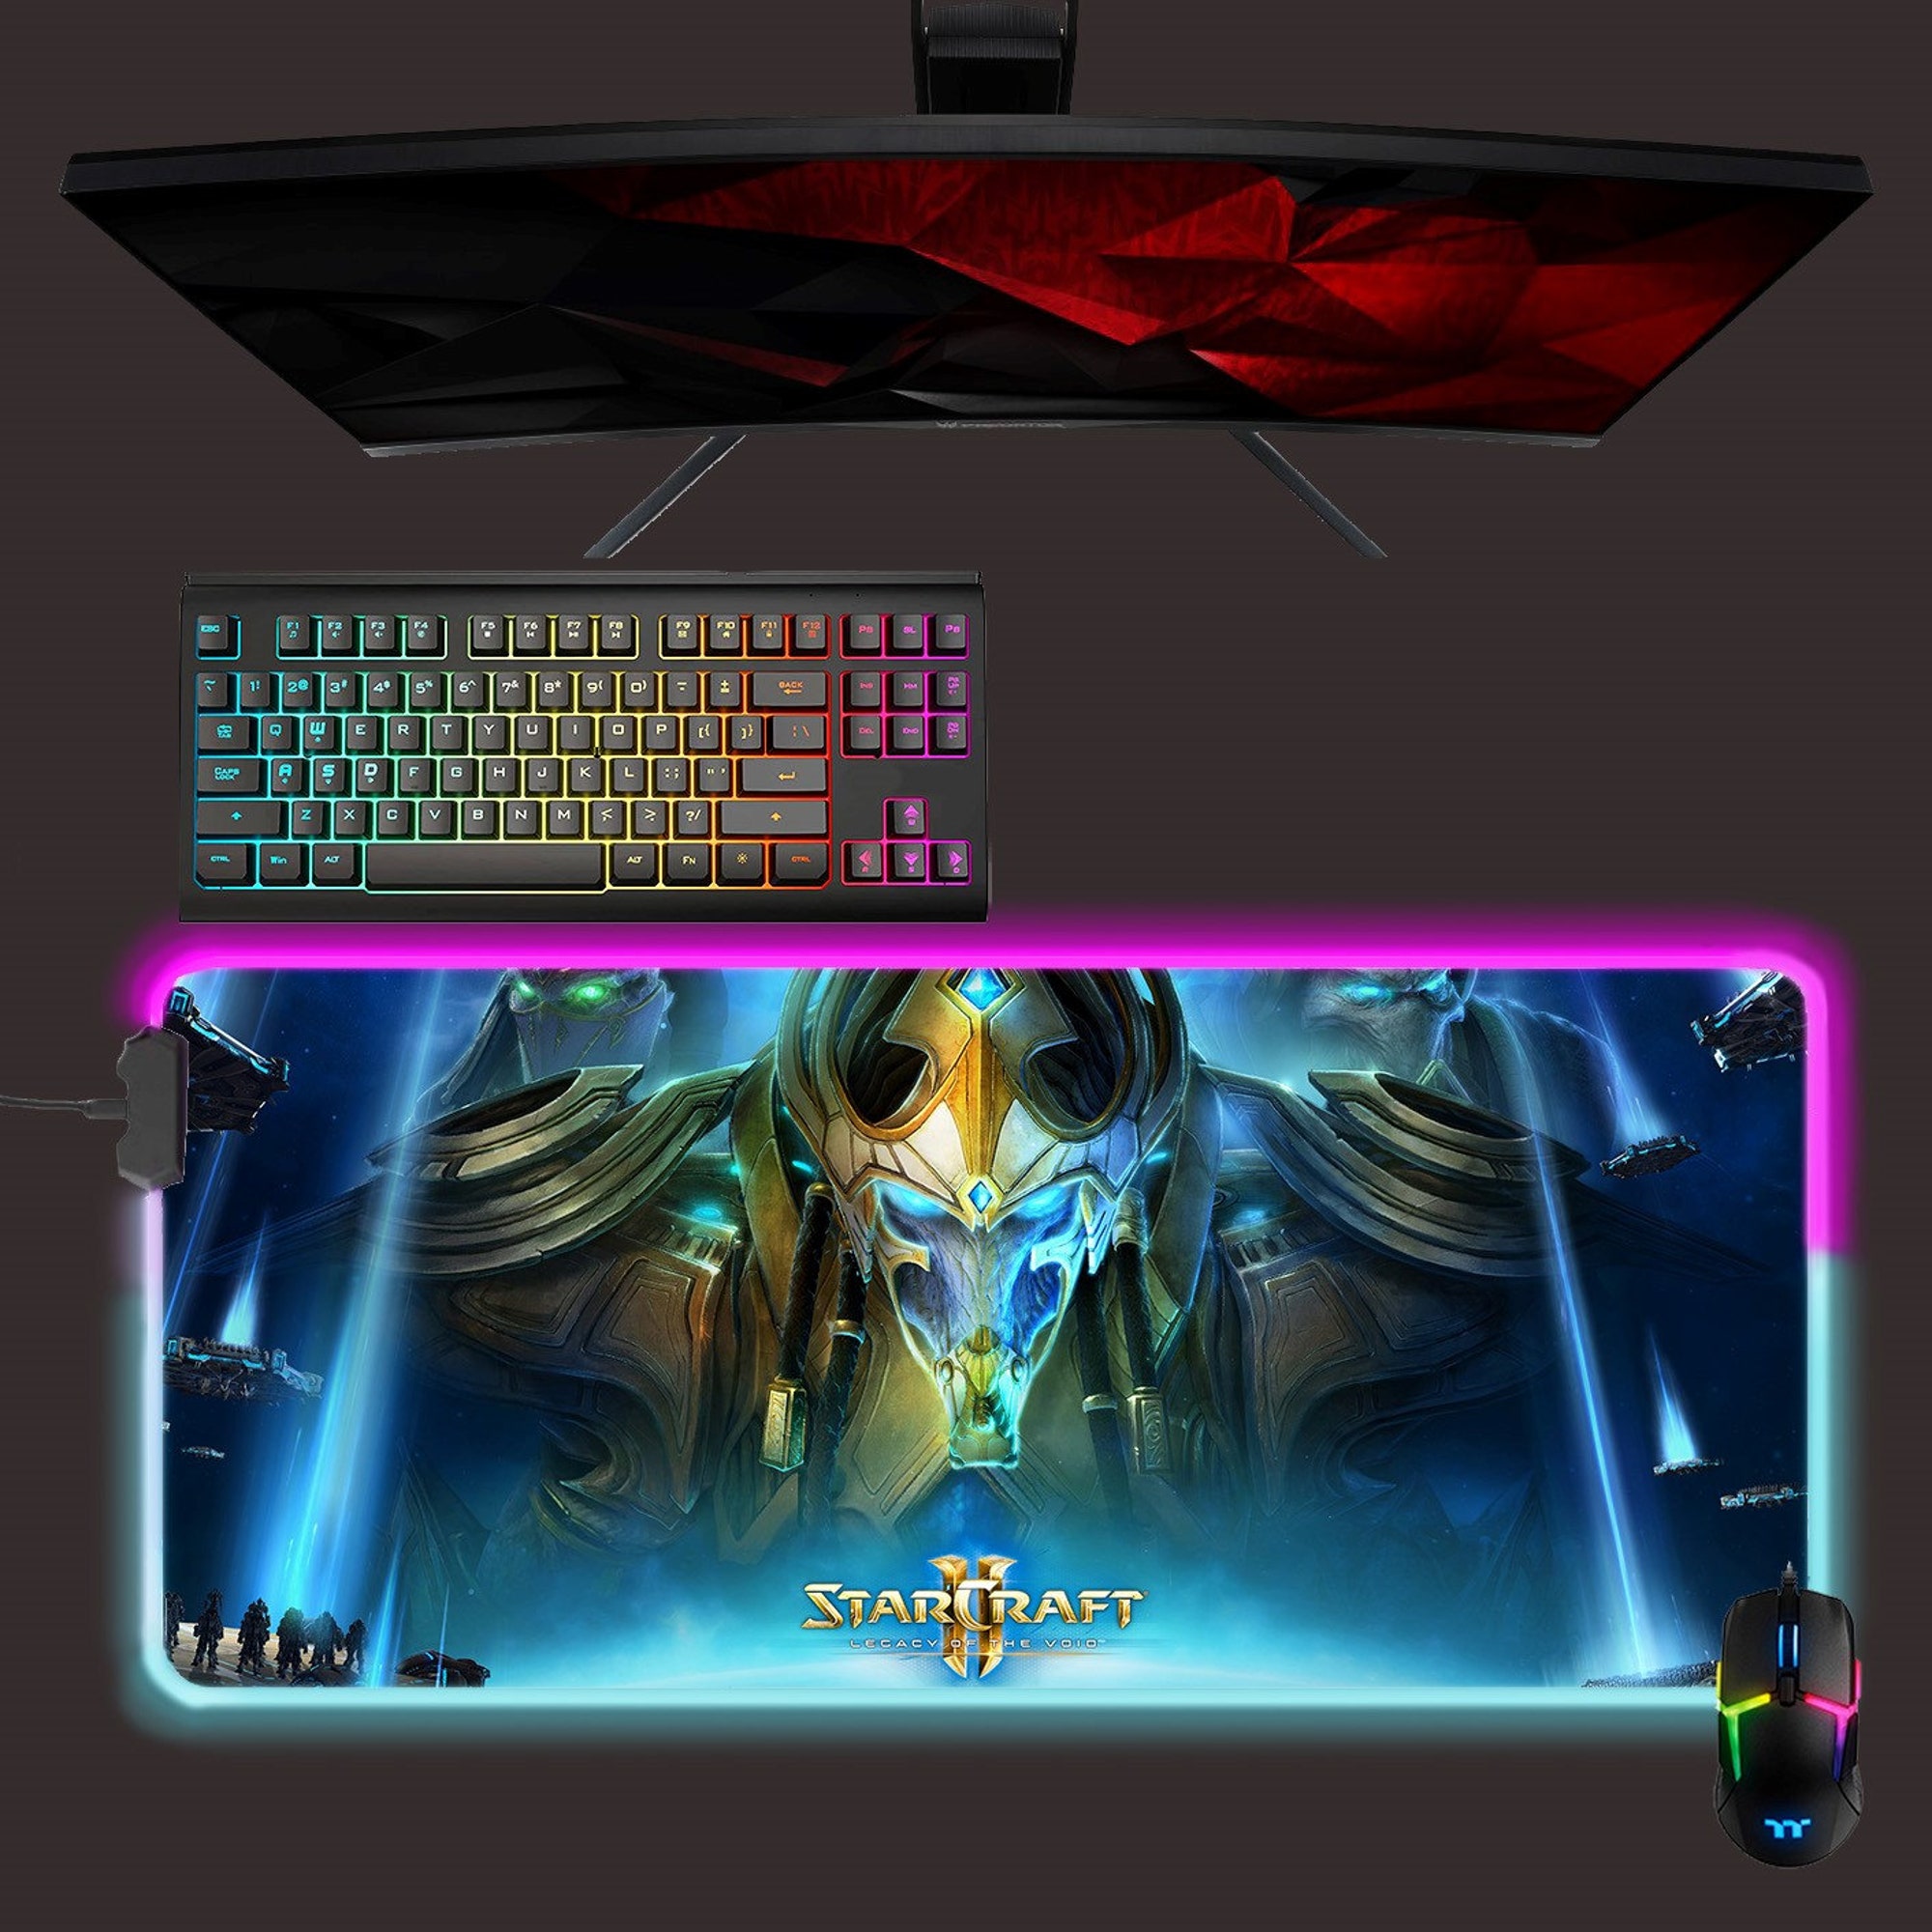 Starcraft led mouse mat, rgb mouse pad, gaming mouse pad, desk mat, gift for gamer